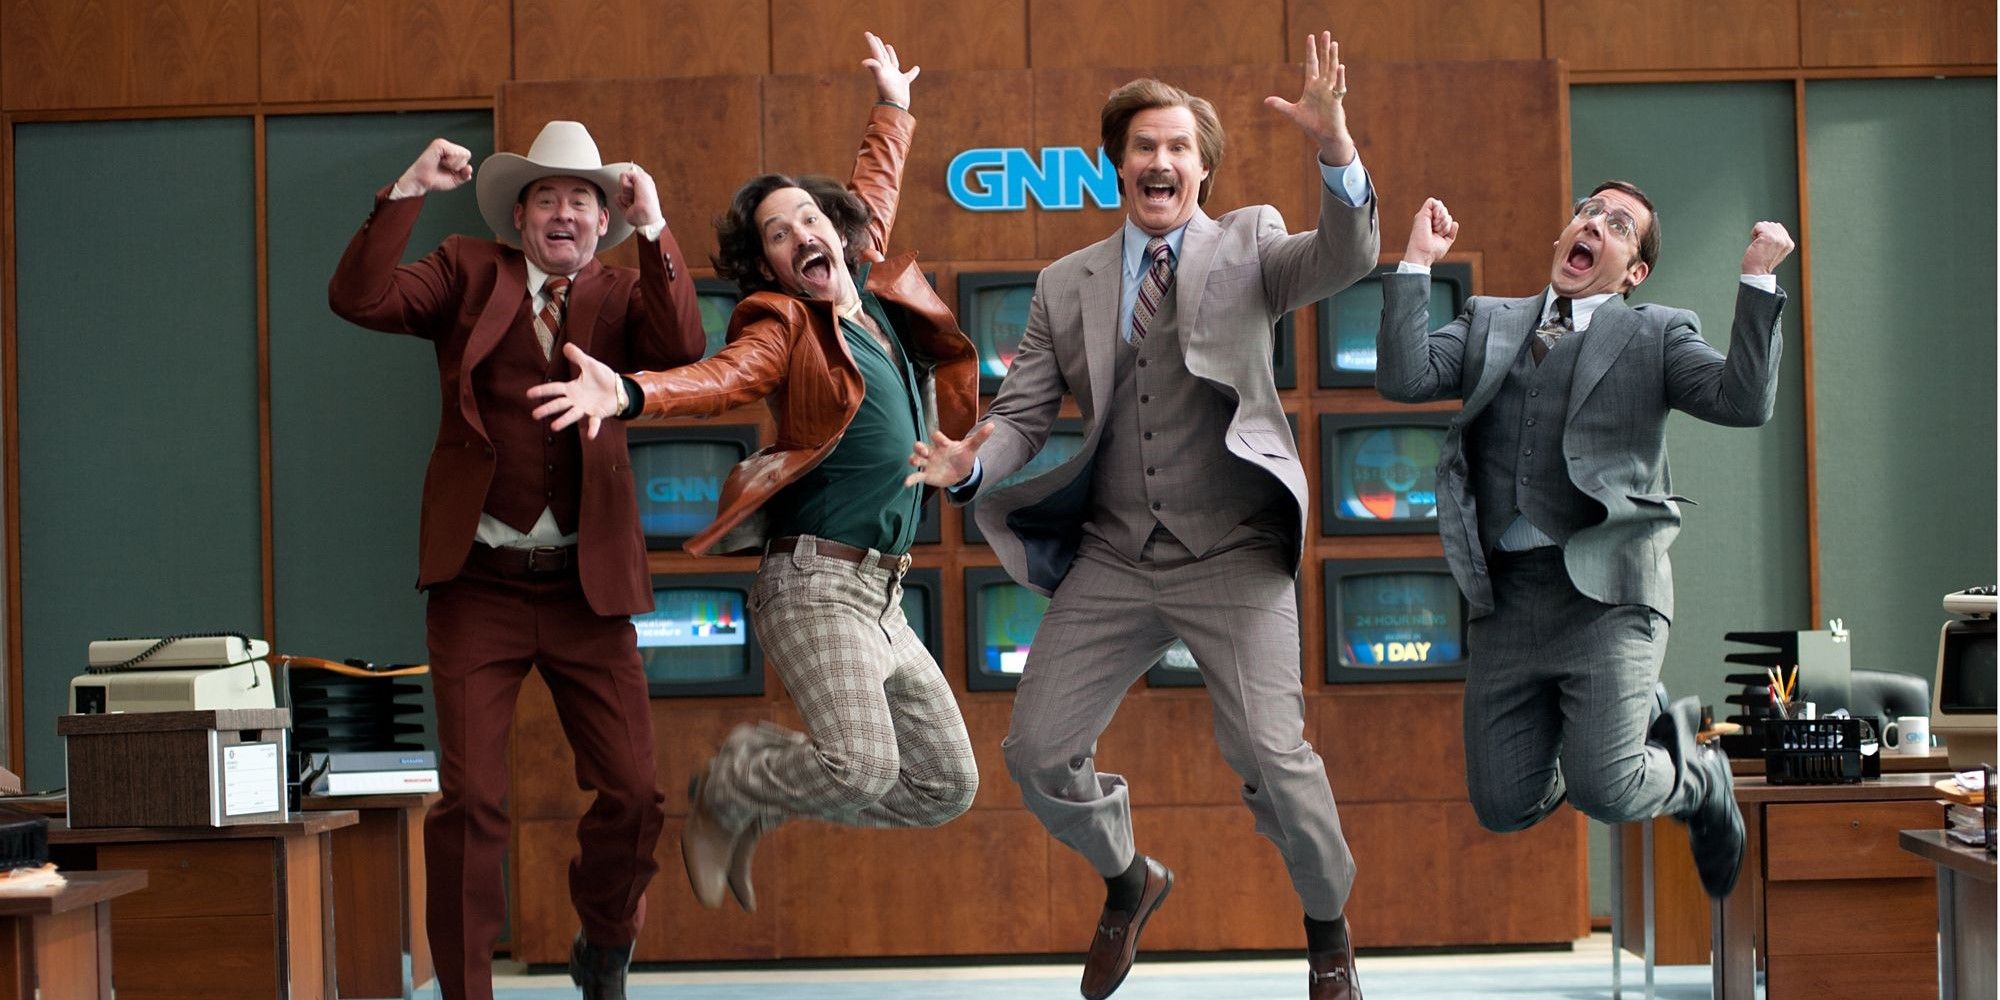 Ron Burgundy and the news team excitedly jump in the air in Anchorman 2: The Legend Continues